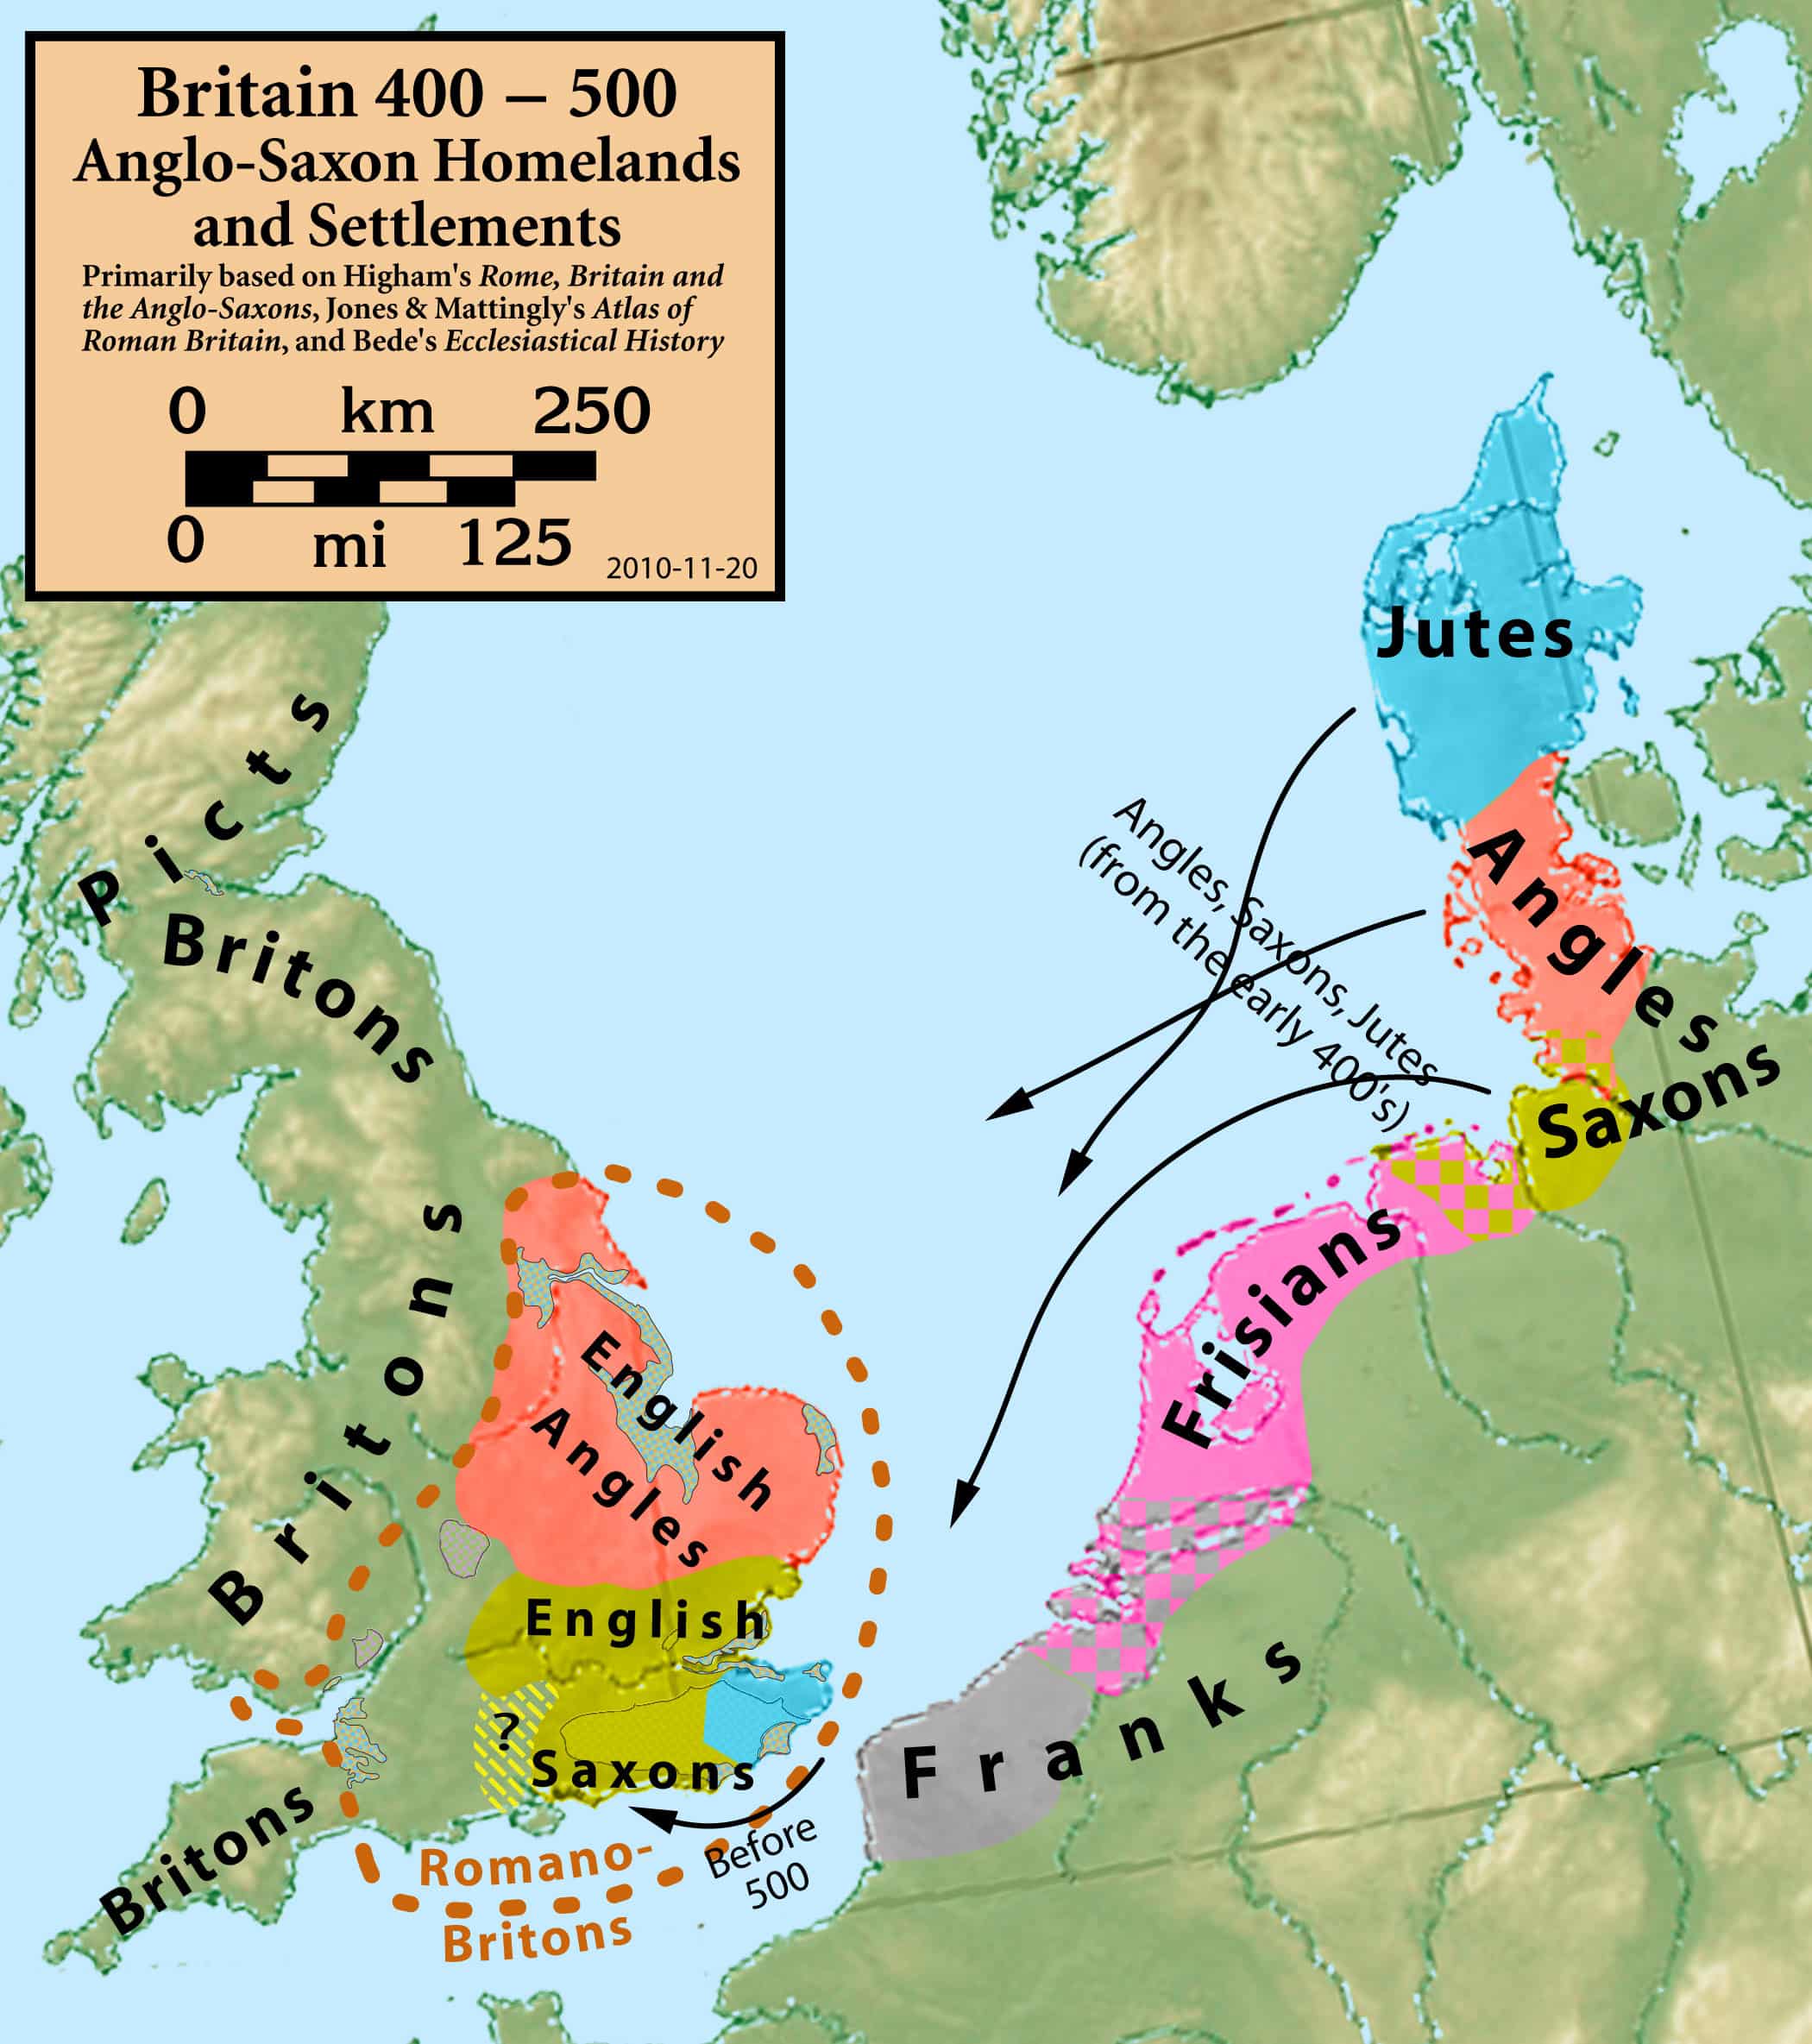 The Anglo-Saxons were made up of 3 Different Tribes